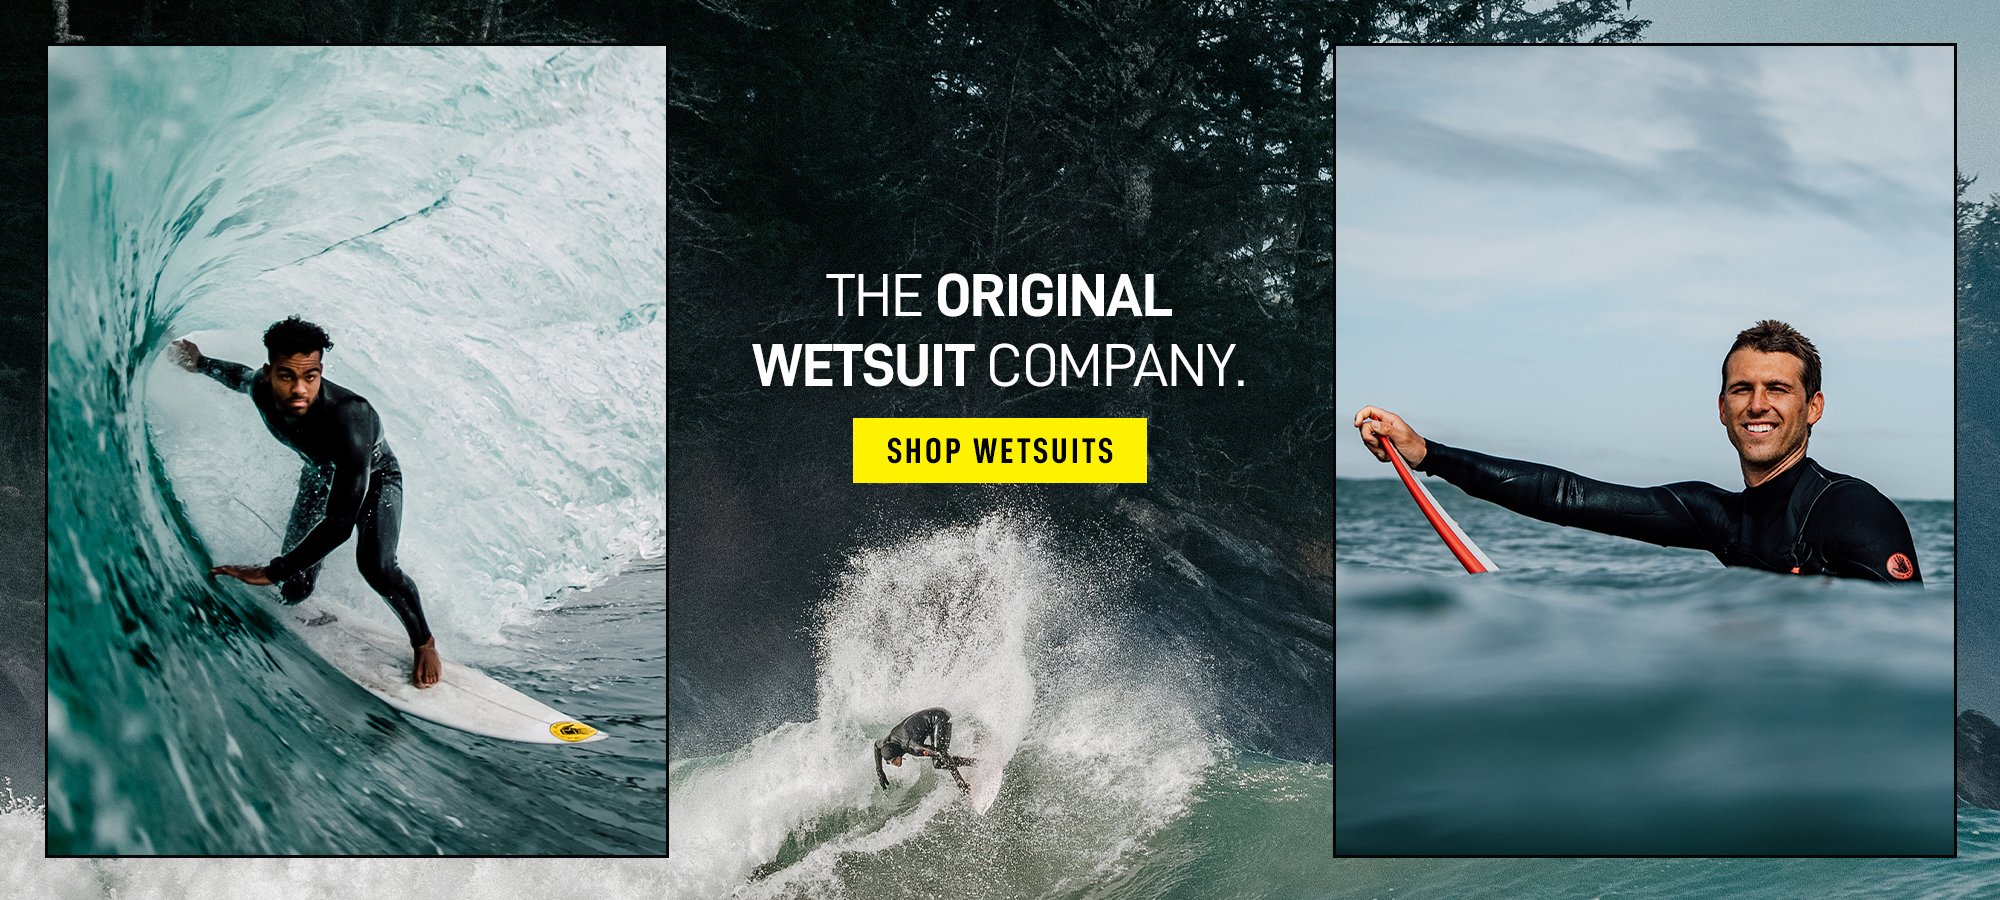 Body Glove - The Original Wetsuit Company - Shop Now